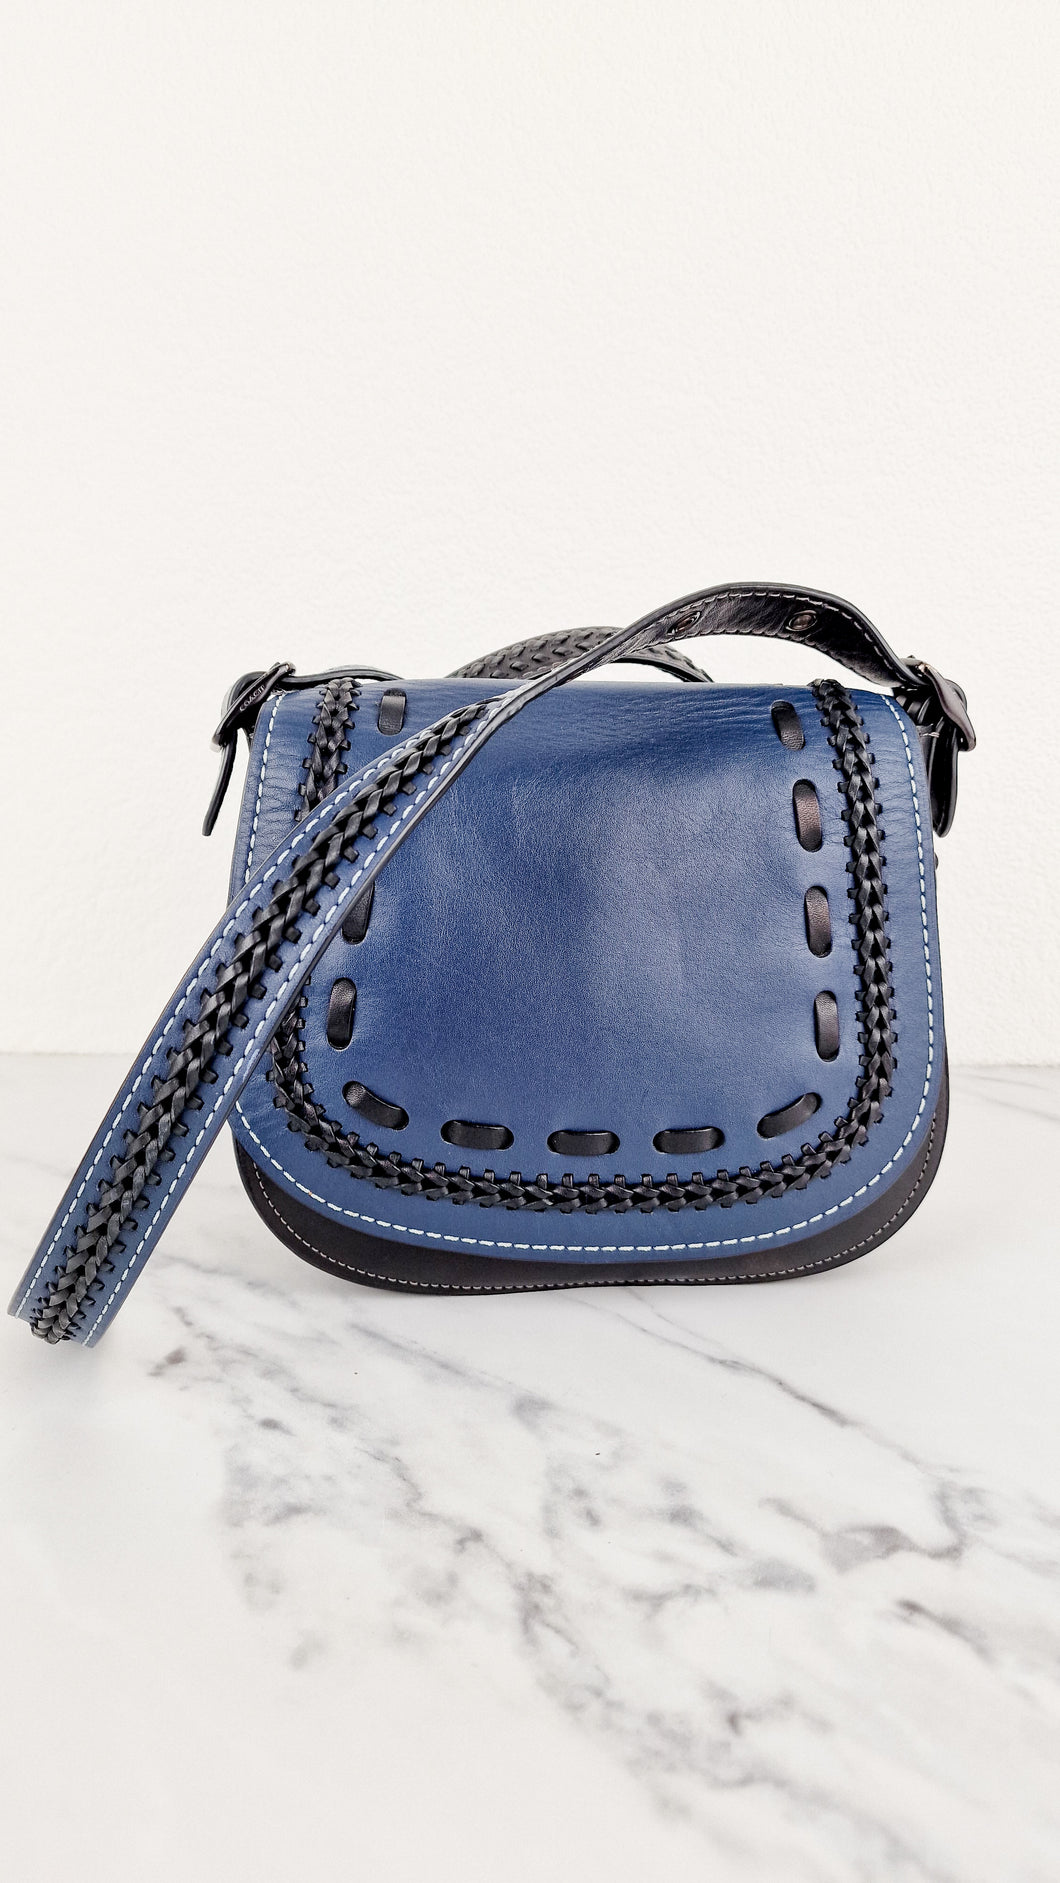 Coach 1941 Saddle 23 in Prussian Blue With Whiplash Black Detail - Crossbody Bag - Coach 58124